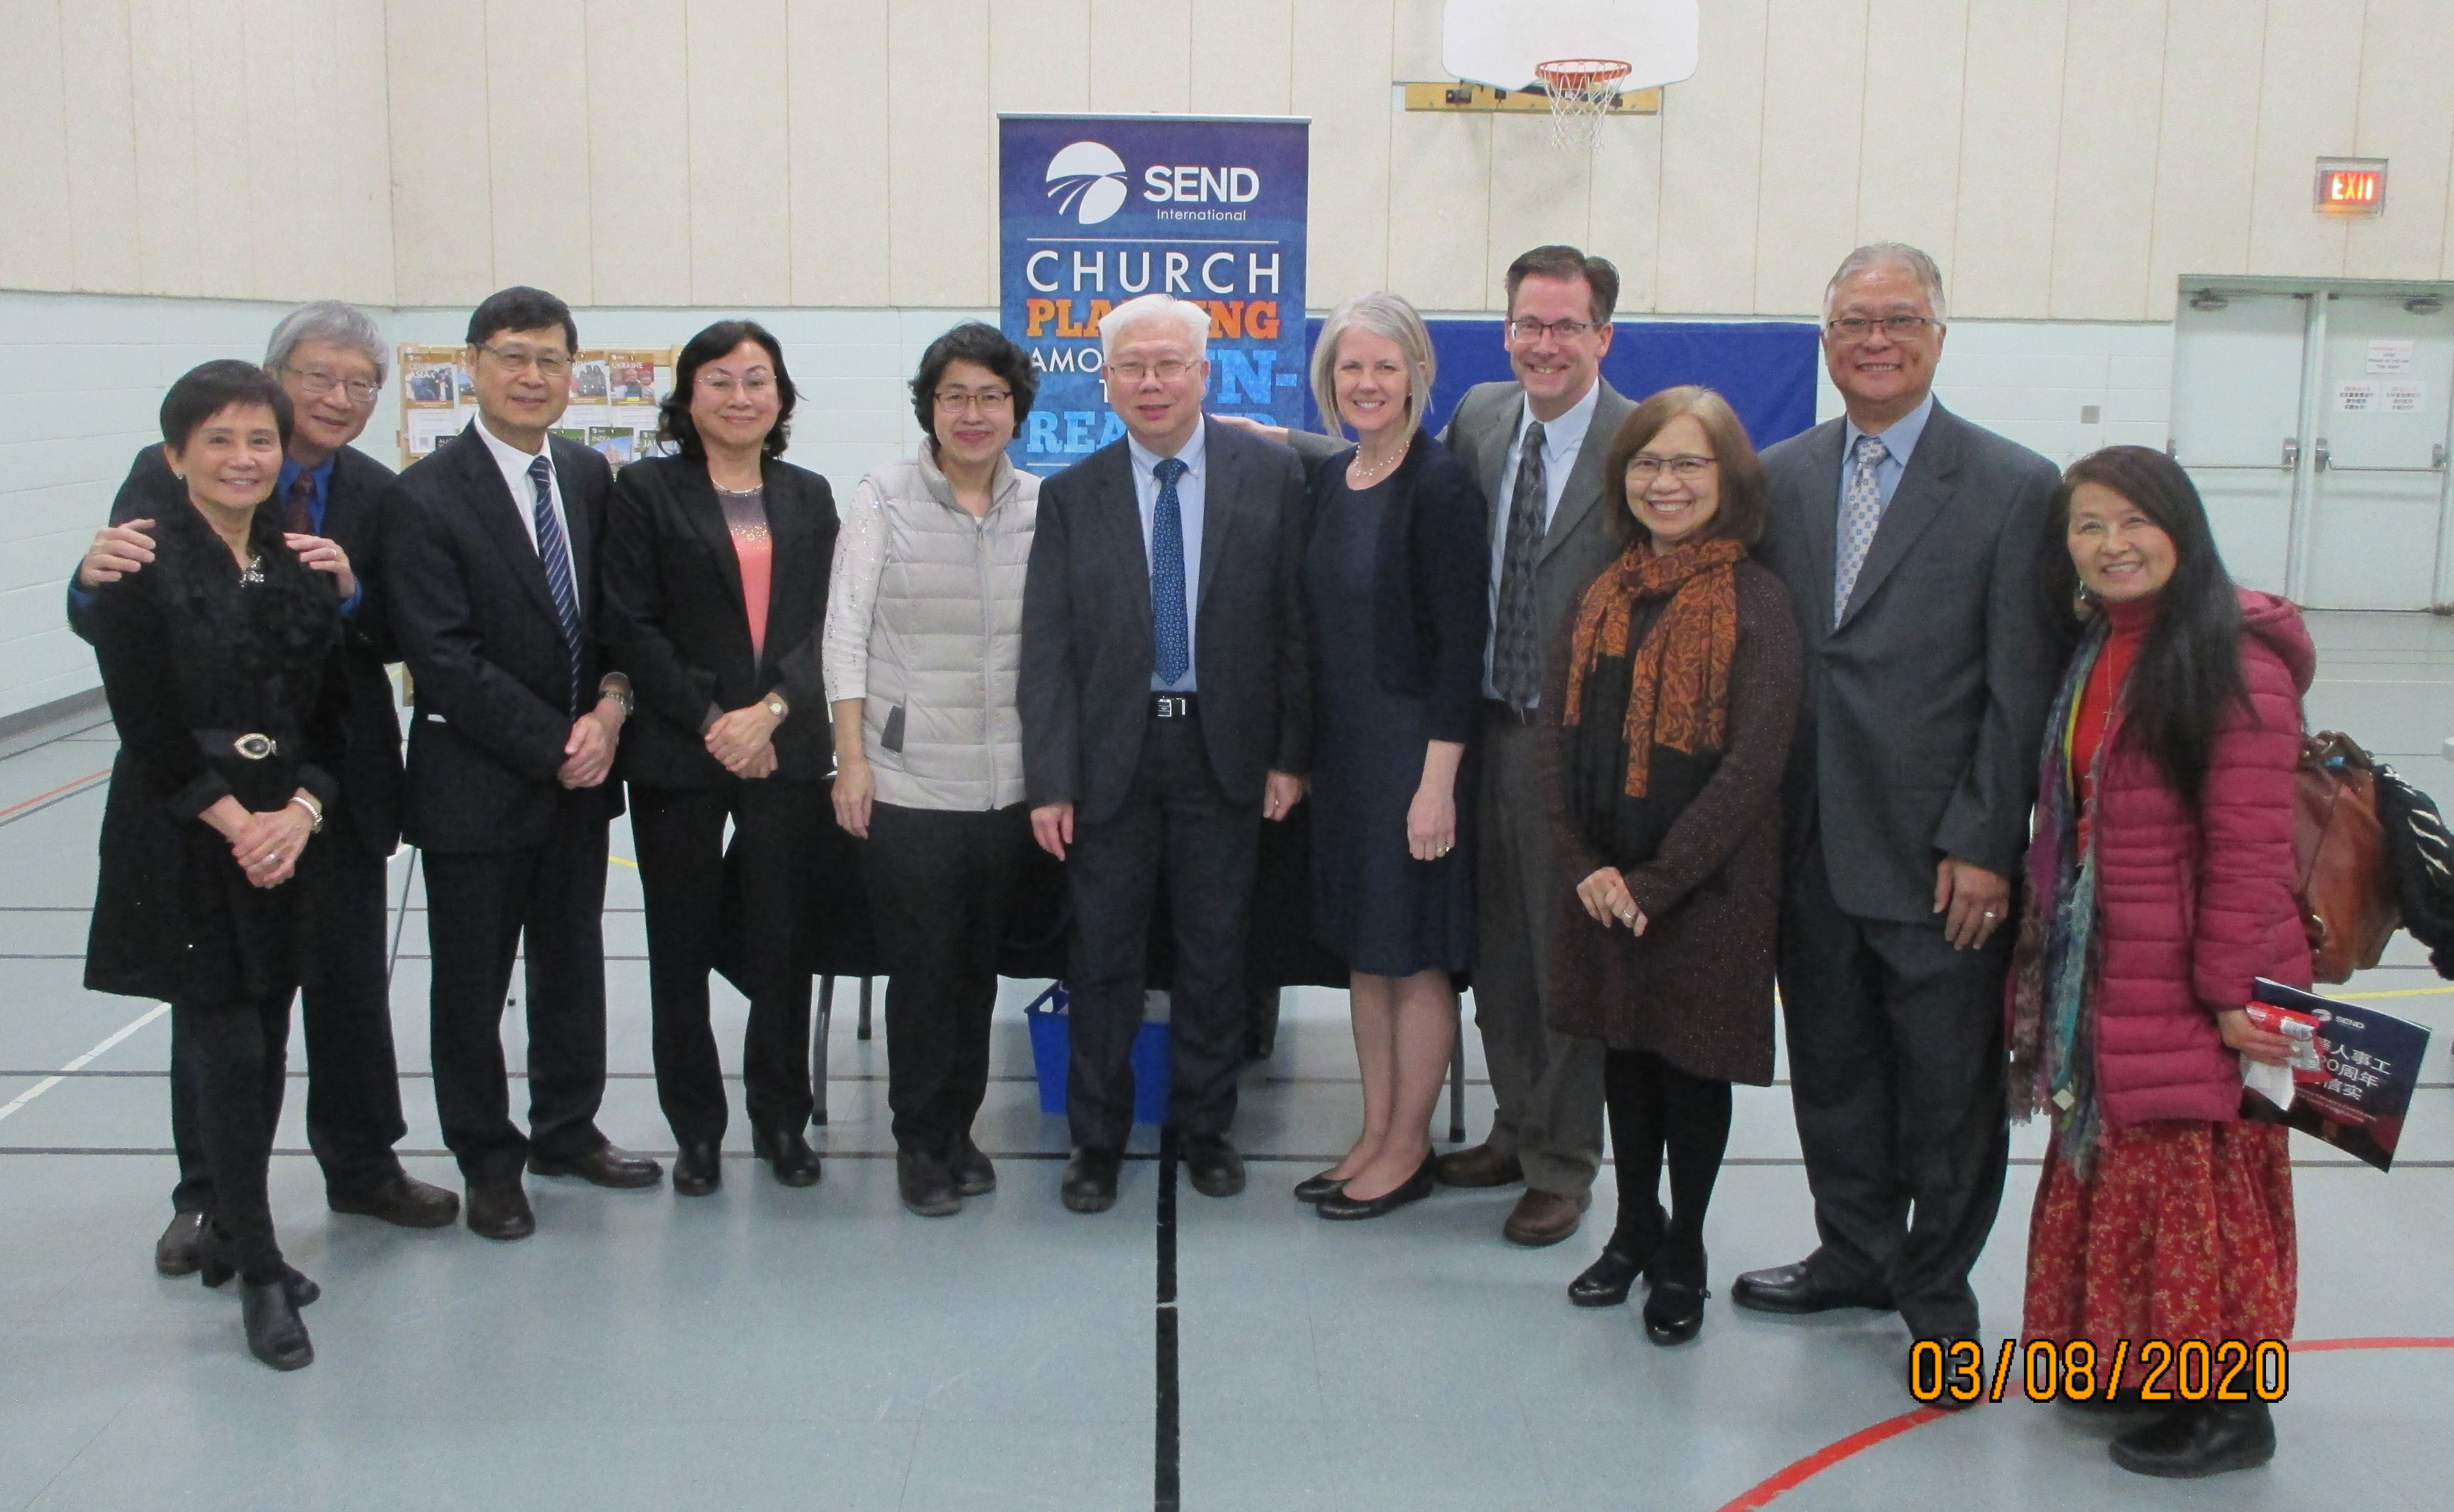 Chinese Diaspora Ministry Participants in Toronto in March 2020